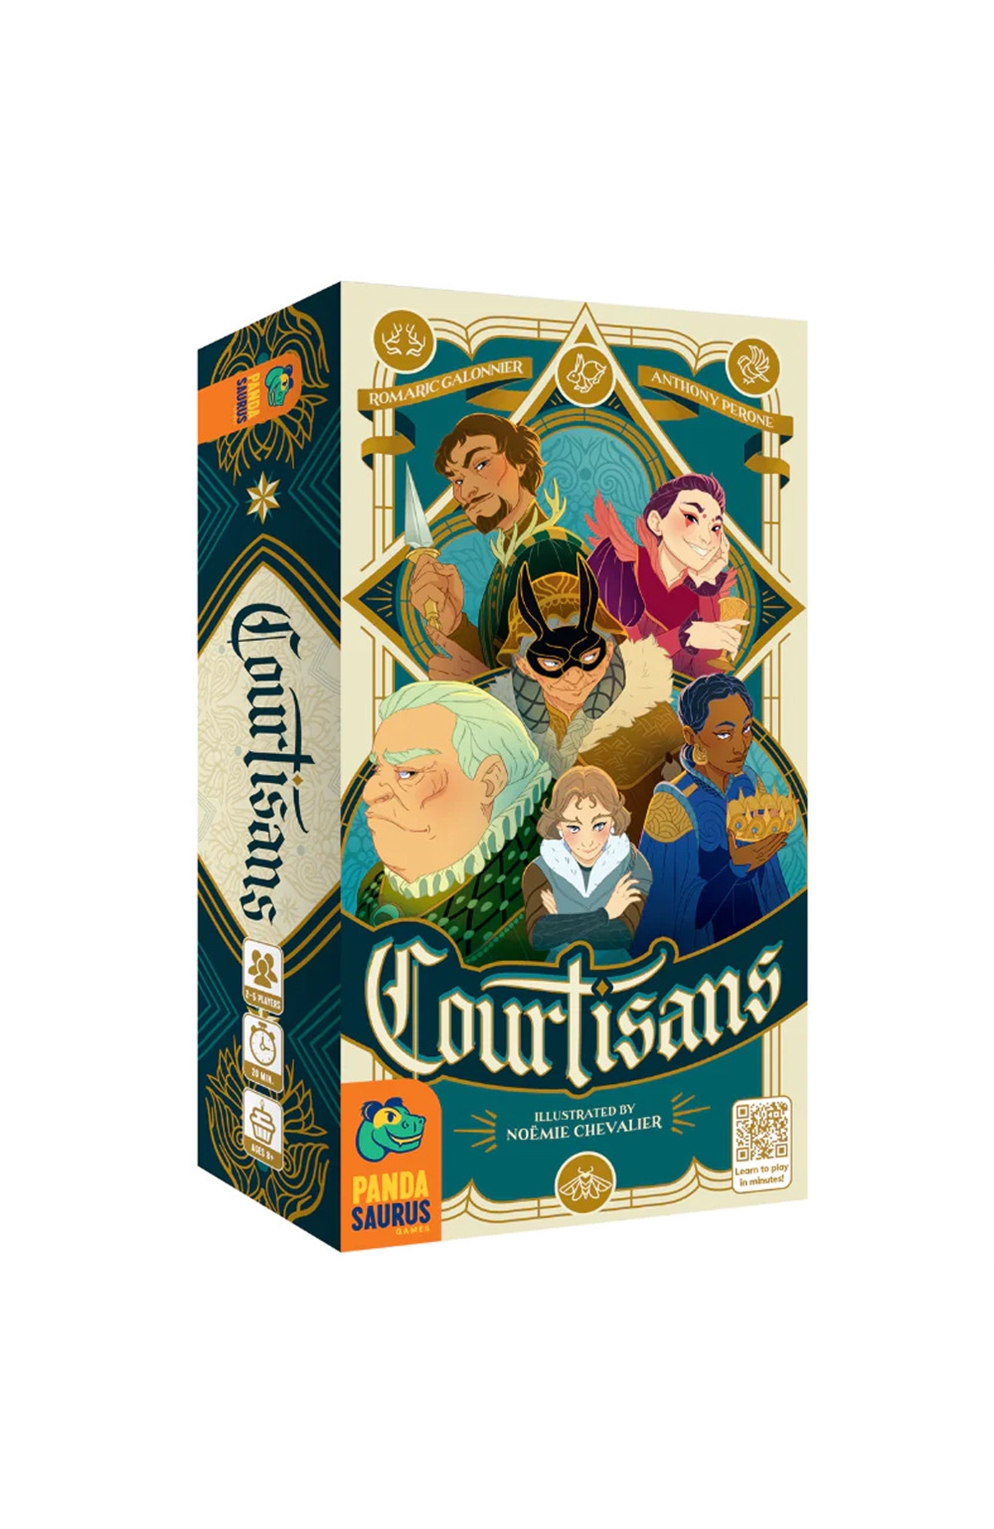 Courtisans Board Game